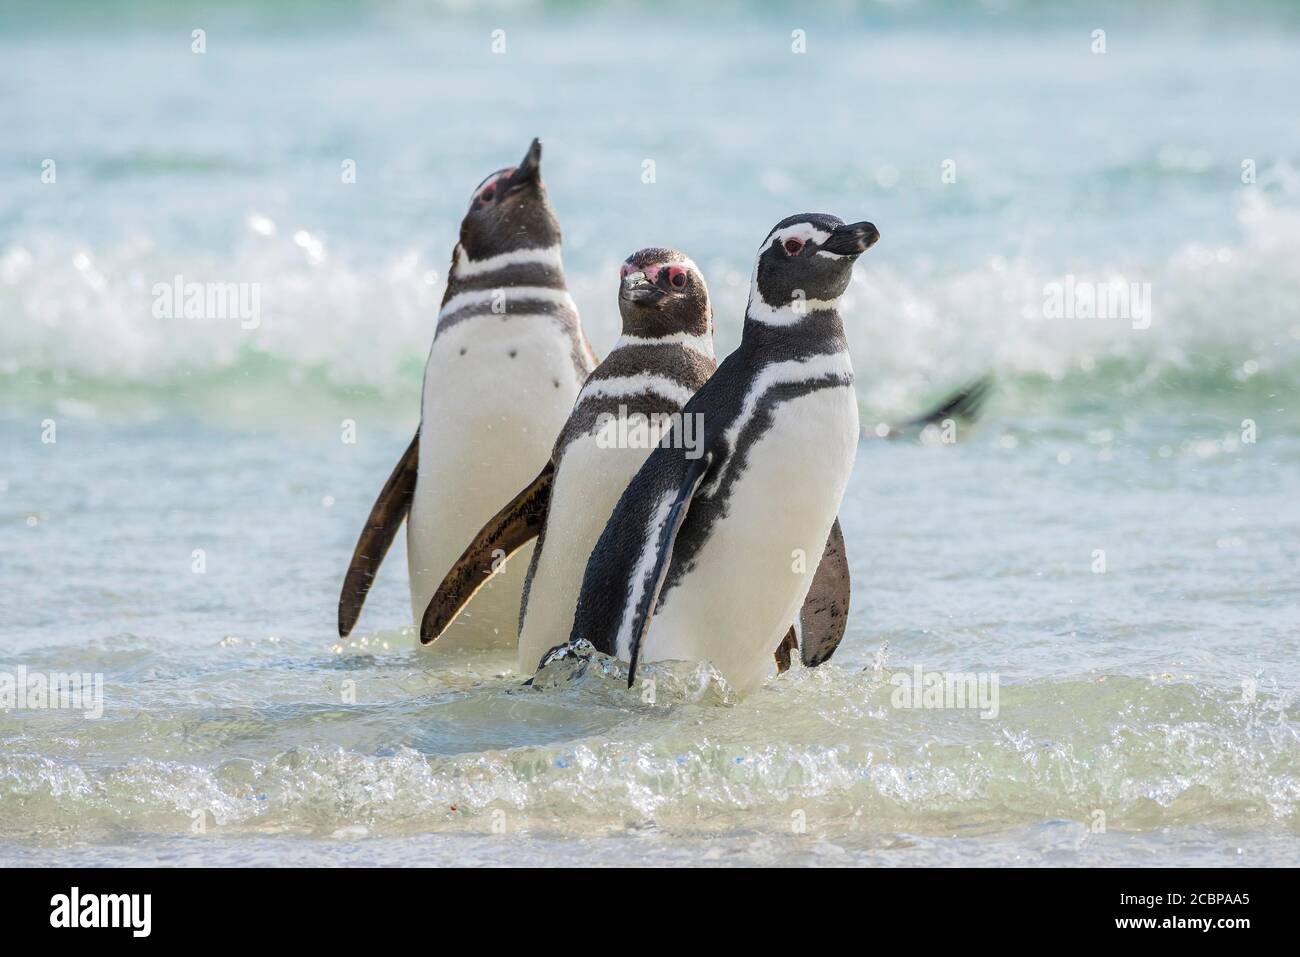 Magellanic penguins (Spheniscus magellanicus) in the surf on the beach, The Neck, Saunders Island, Falkland Islands, Great Britain, South America Stock Photo